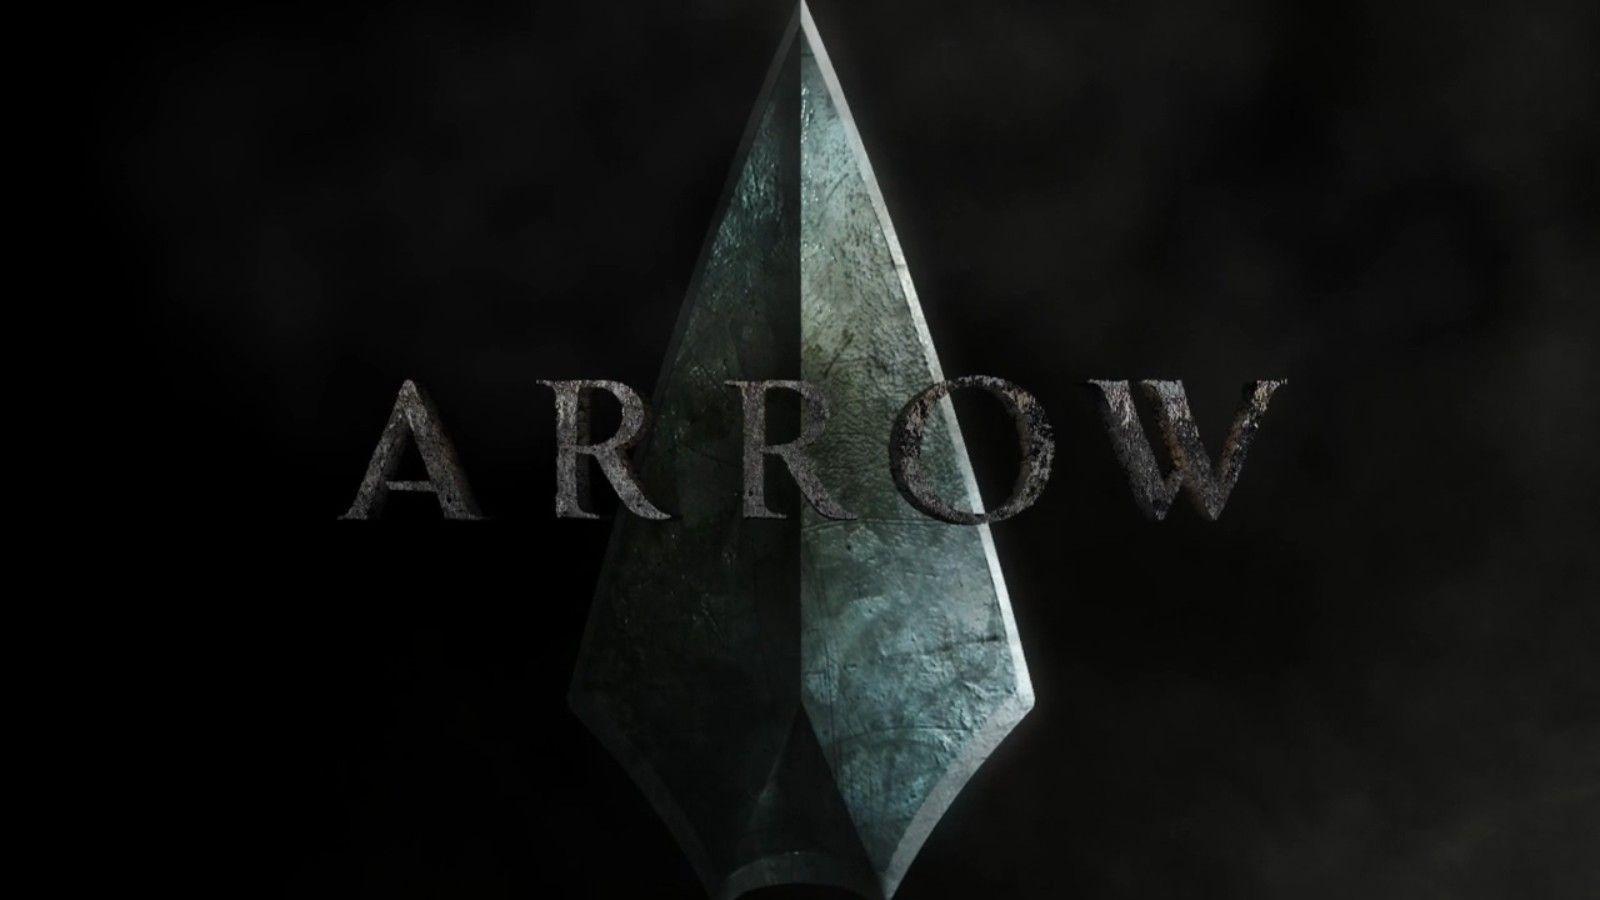 Wallpaper Of The Day: Arrow